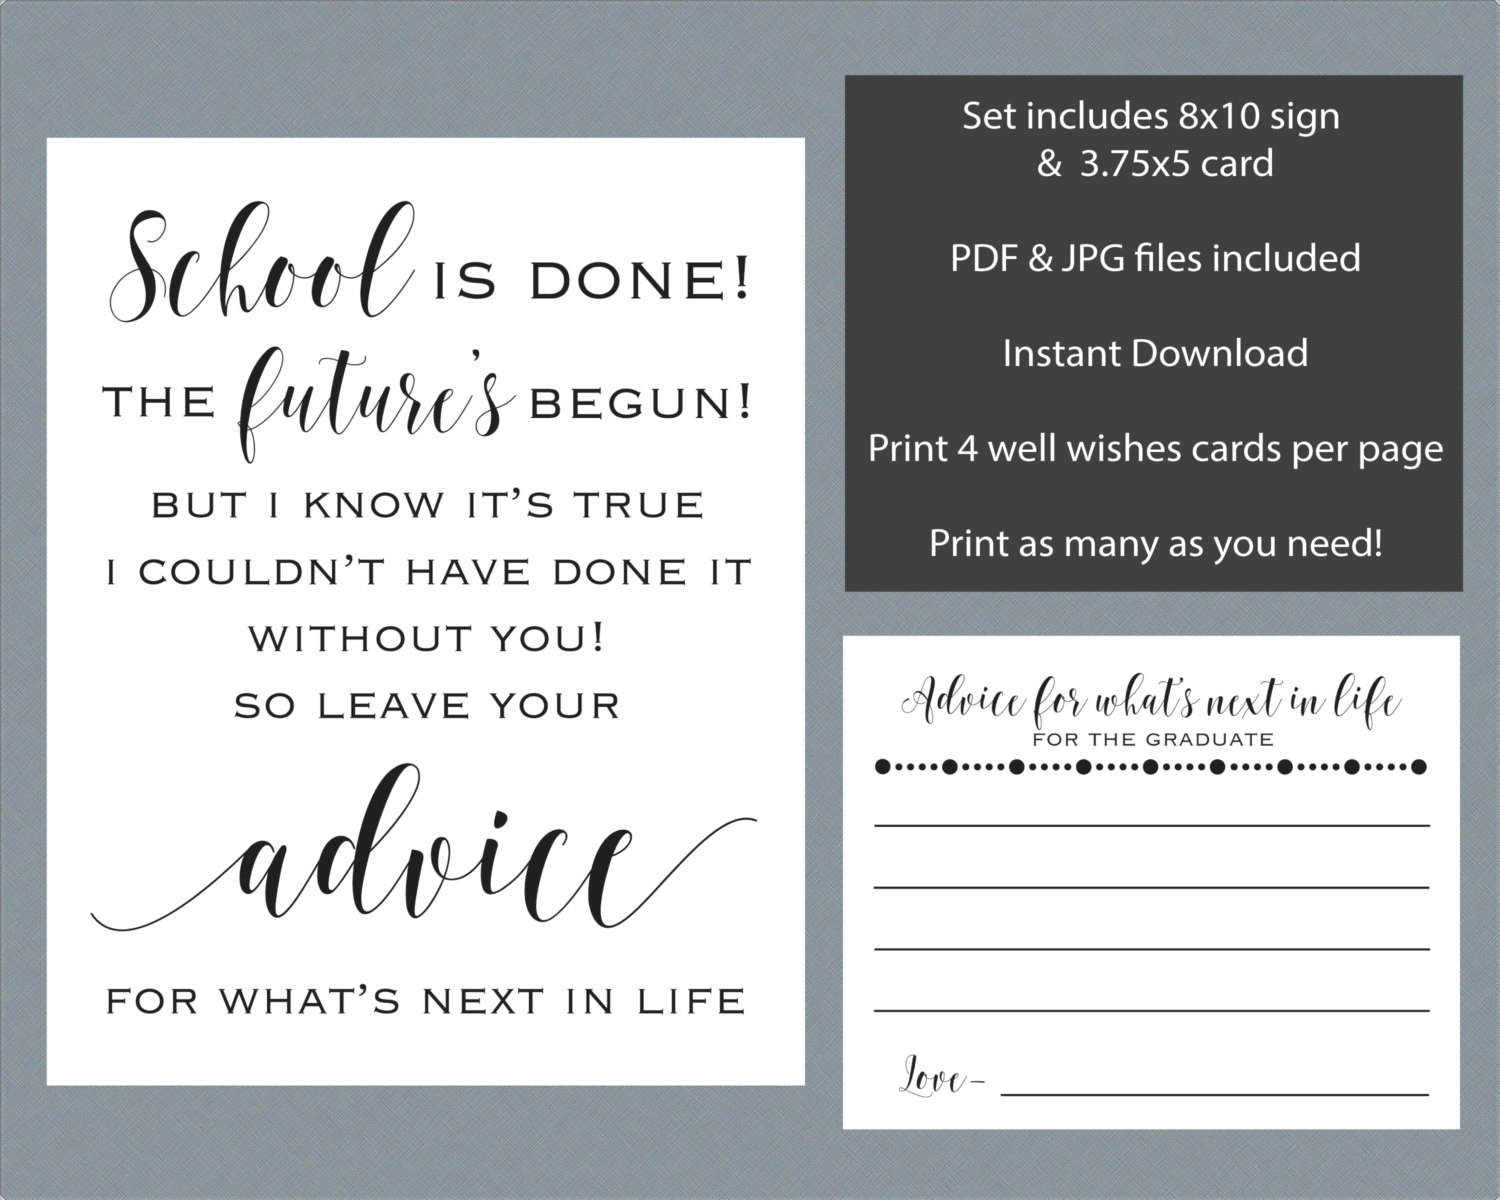 Graduation Wishes Advice Cards Template - 28 Images - Advice Cards - Free Printable Graduation Advice Cards